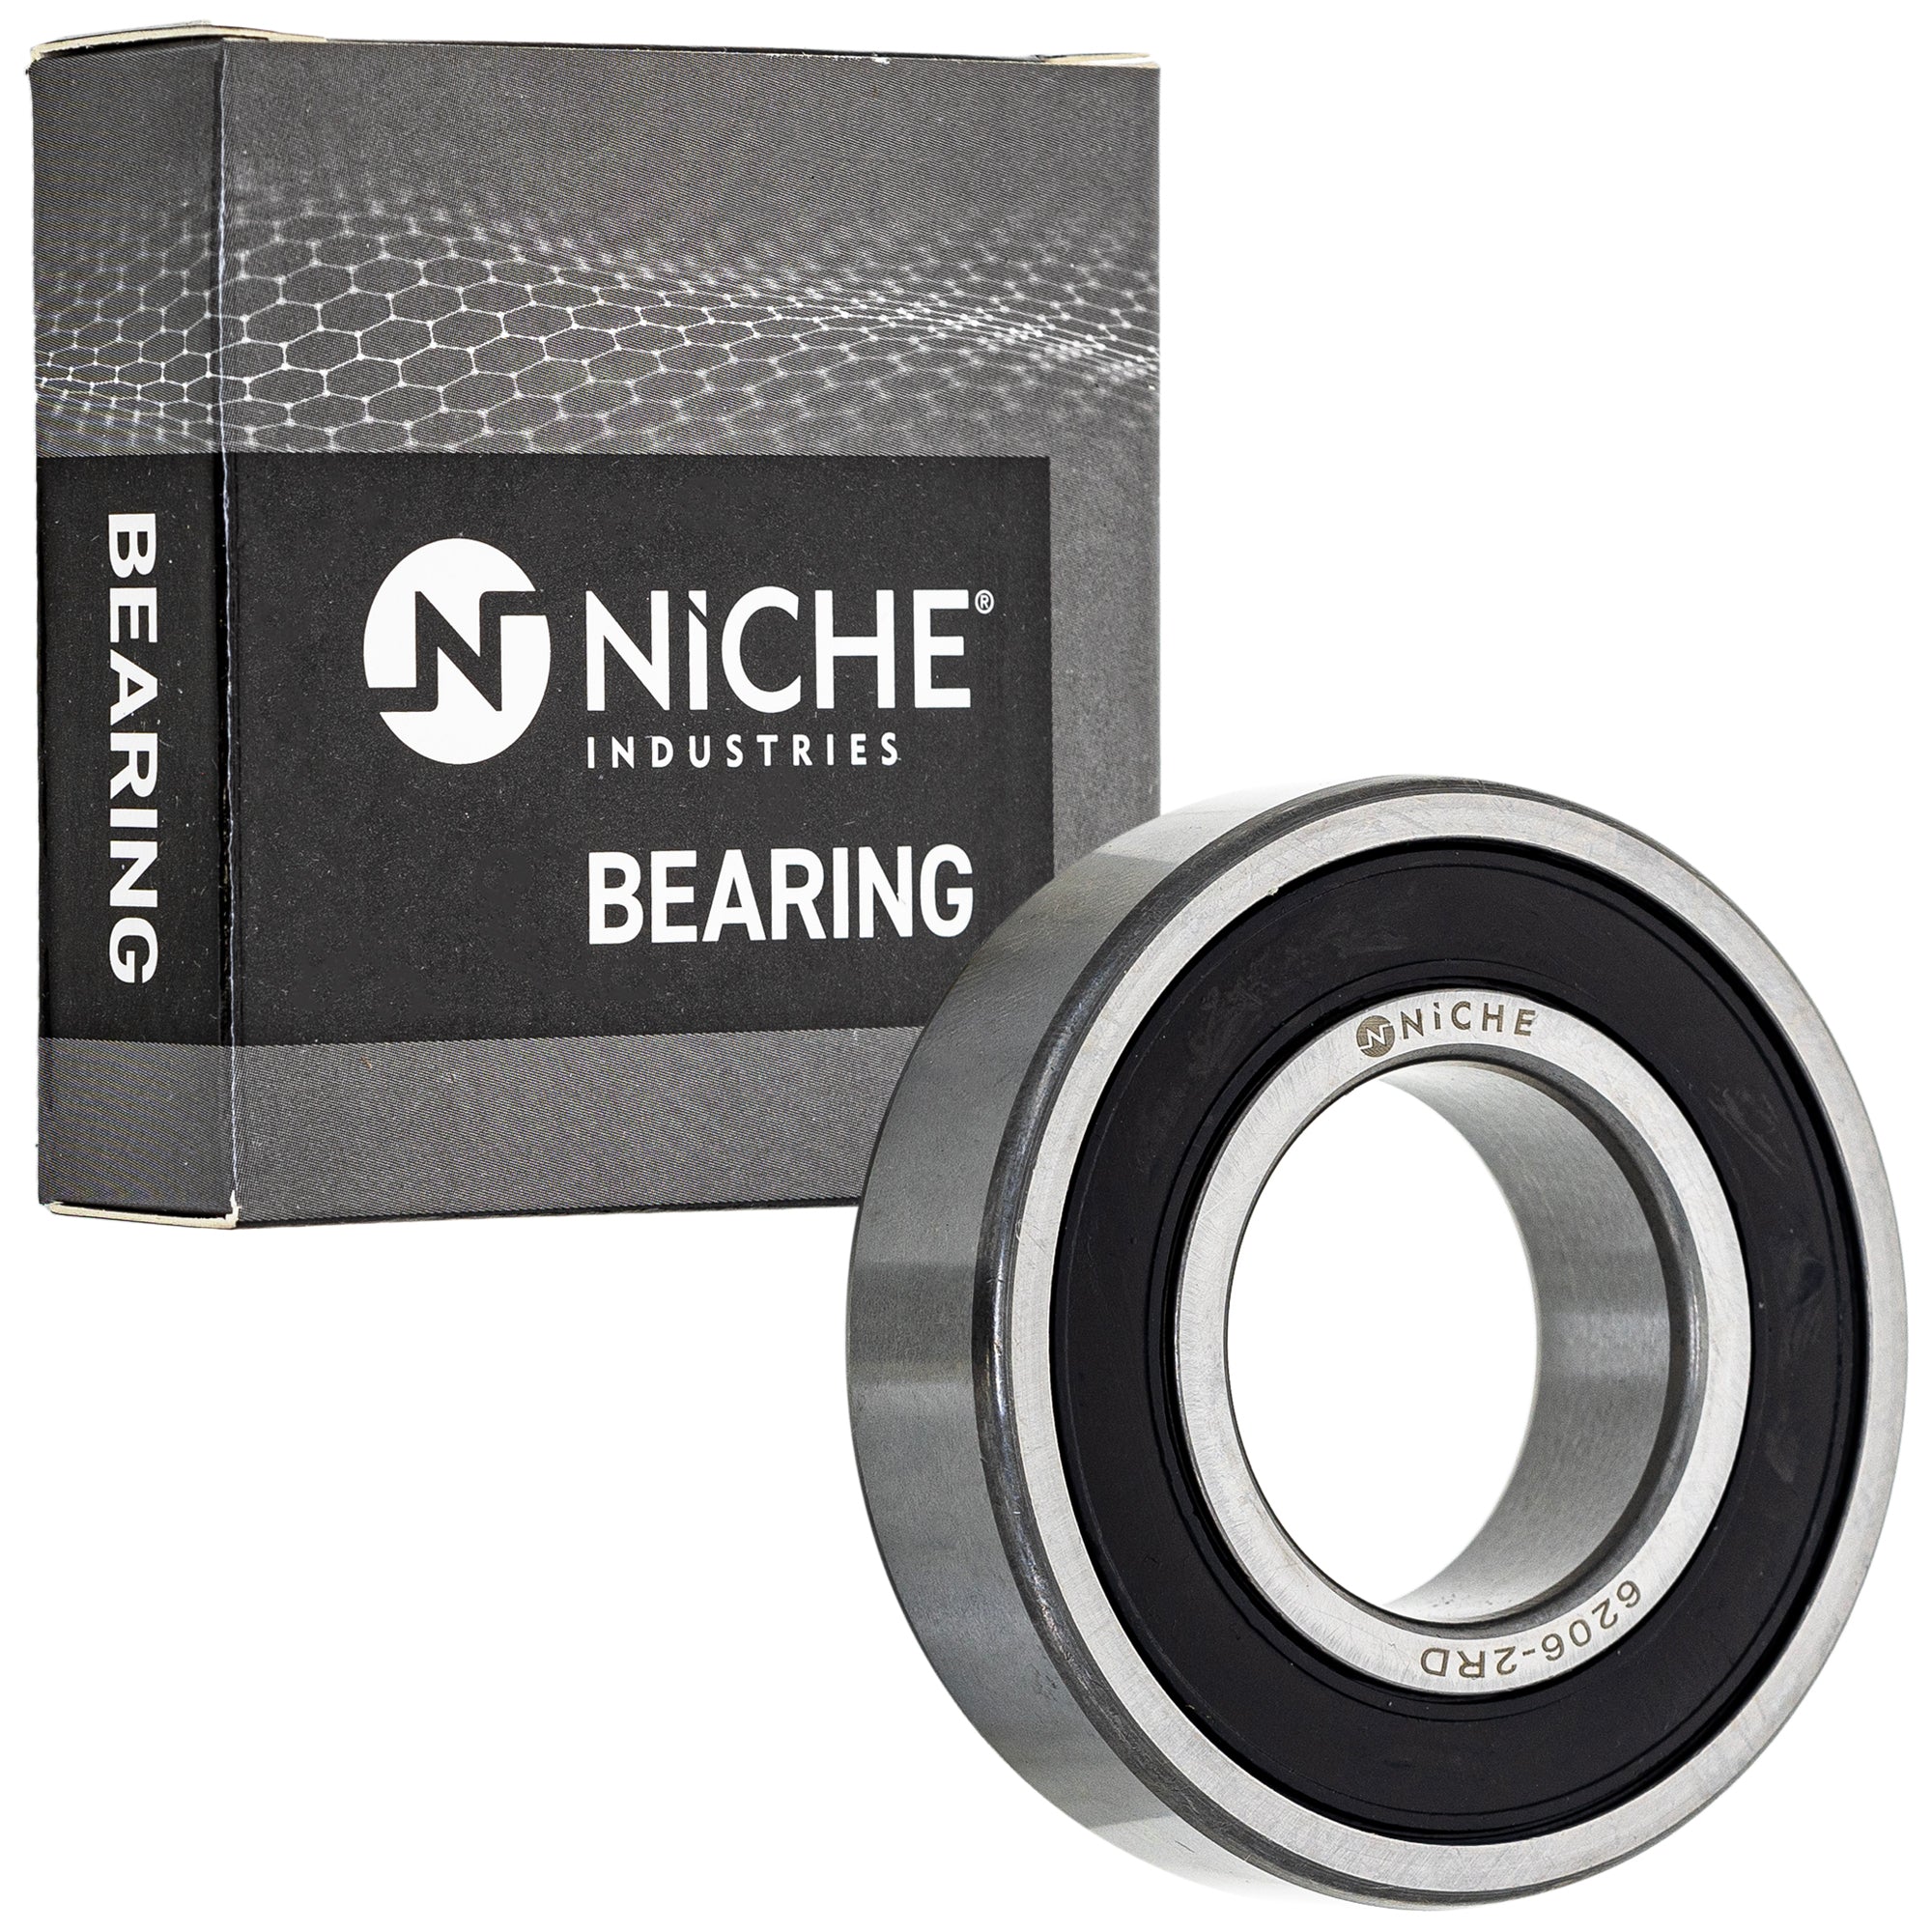 NICHE 519-CBB2270R Bearing & Seal Kit 10-Pack for zOTHER ZRX1100